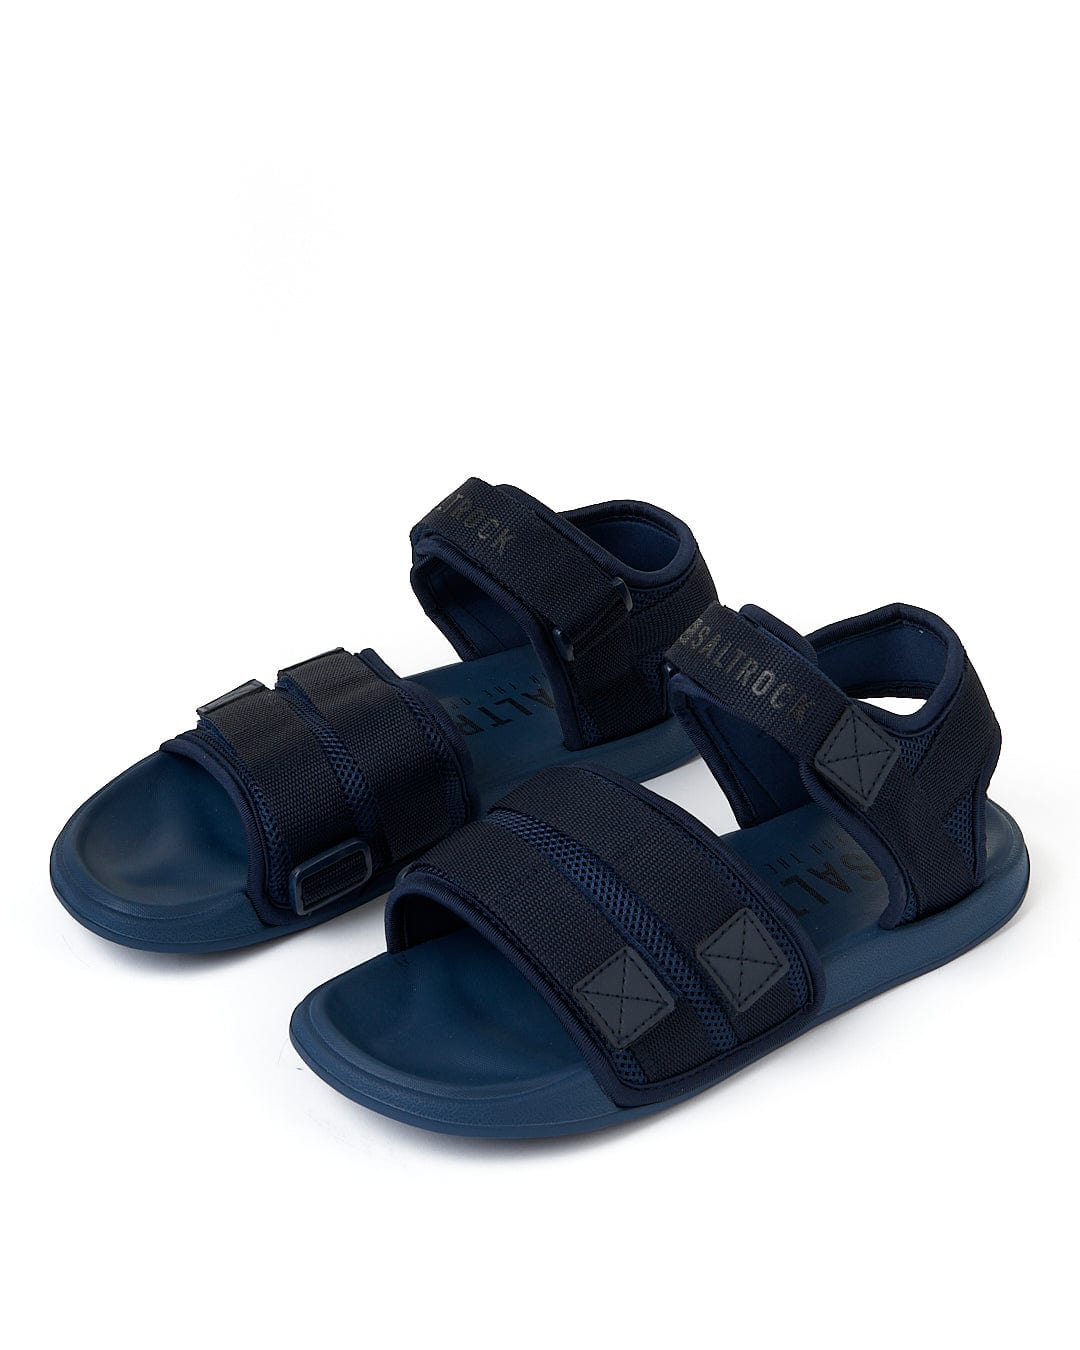 A pair of Saltrock men's navy Take A Hike - Velcro Slider - Blue sandals with straps.